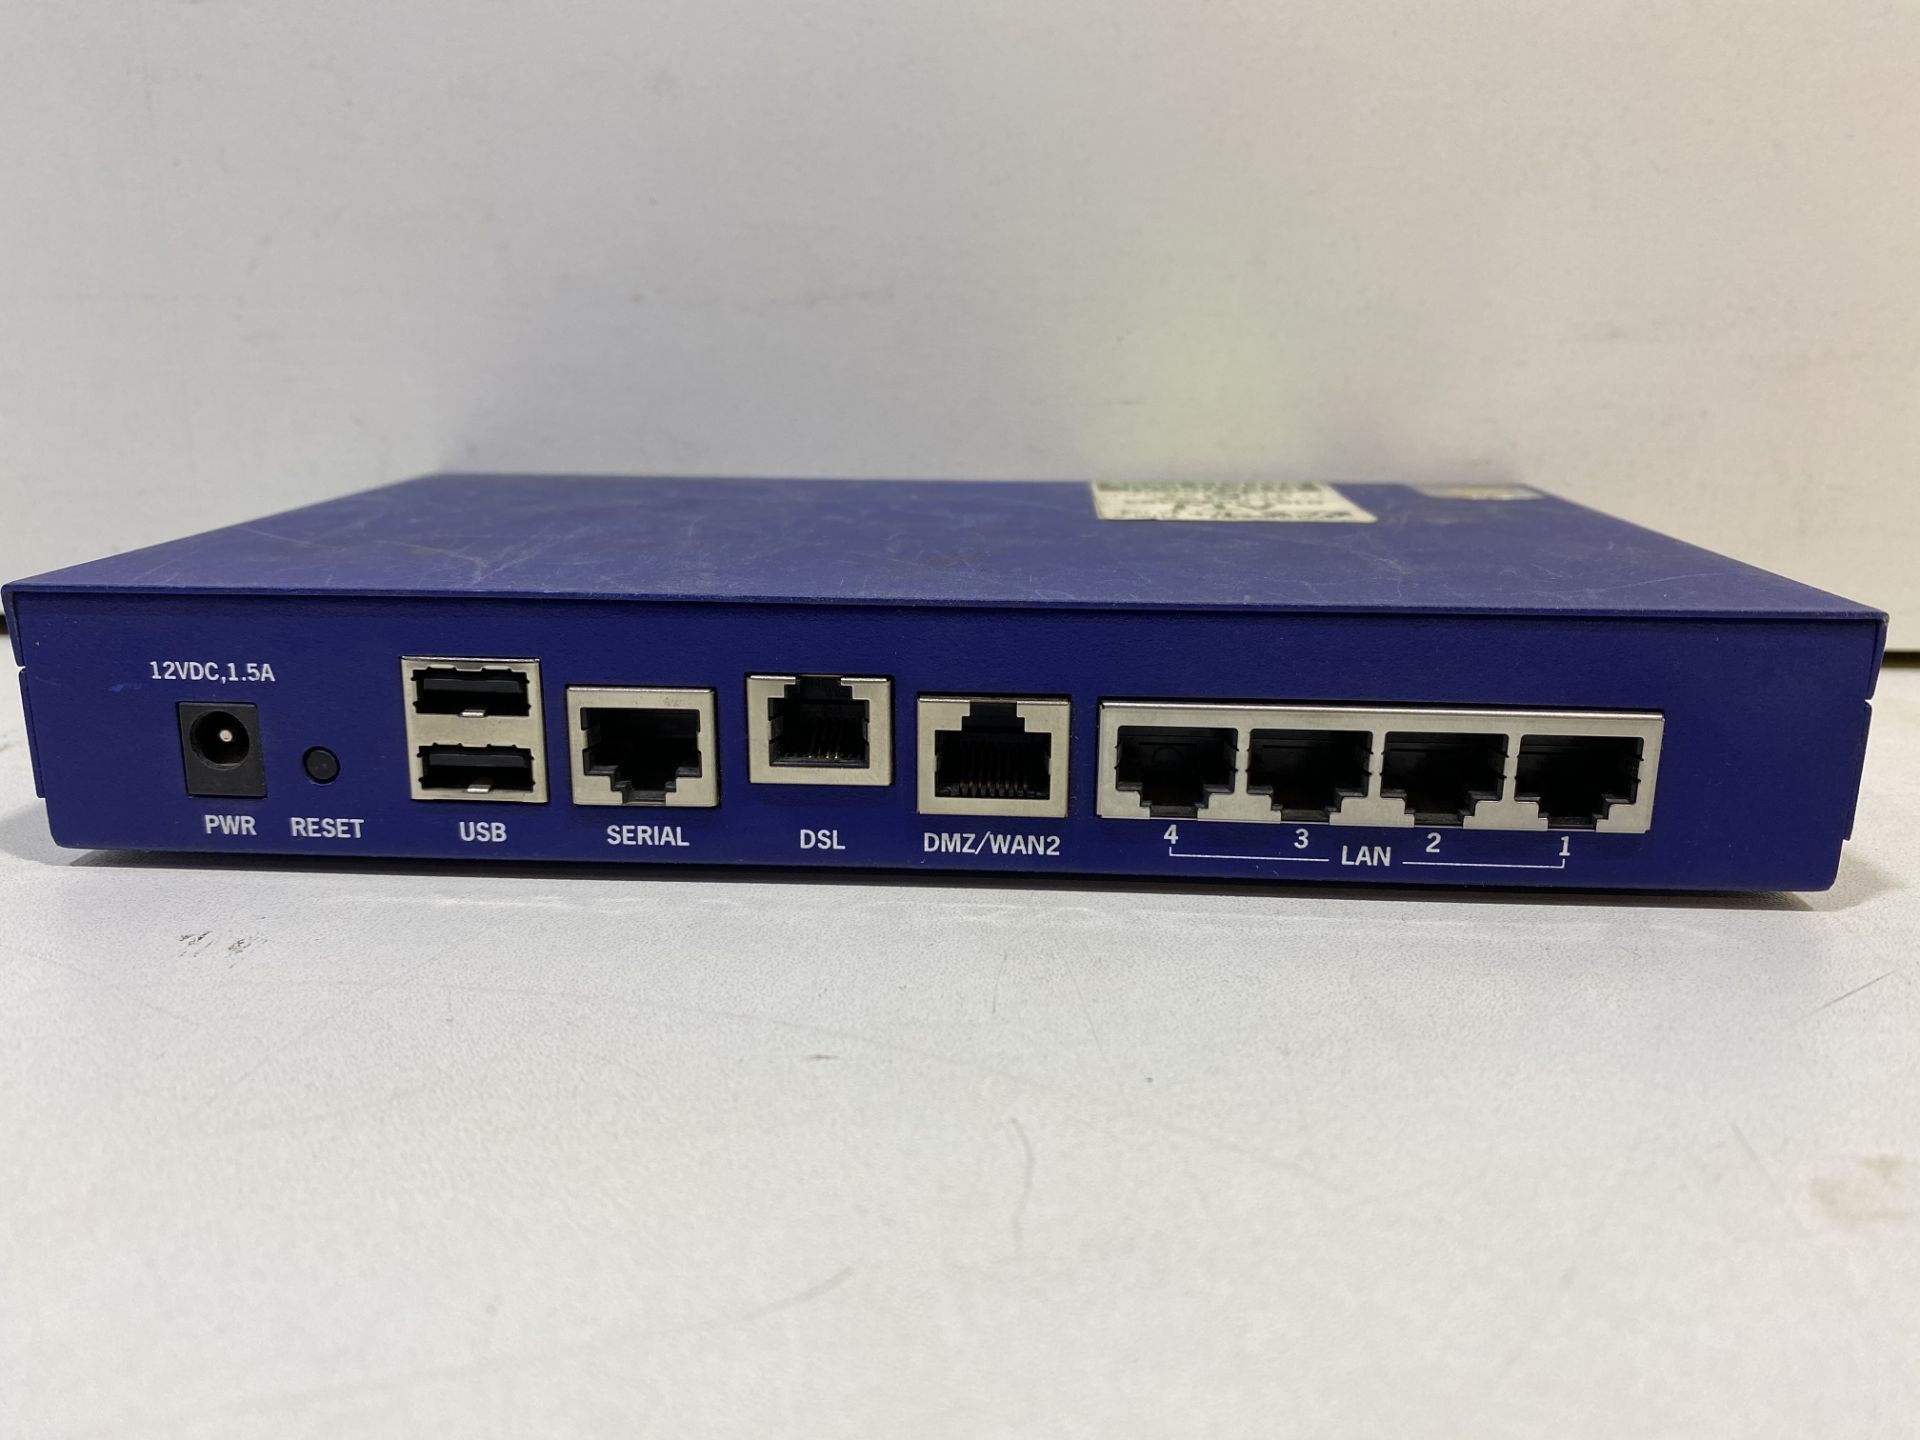 Checkpoint UTM-1 EDGE X Firewall Network Security Appliance - Image 5 of 6